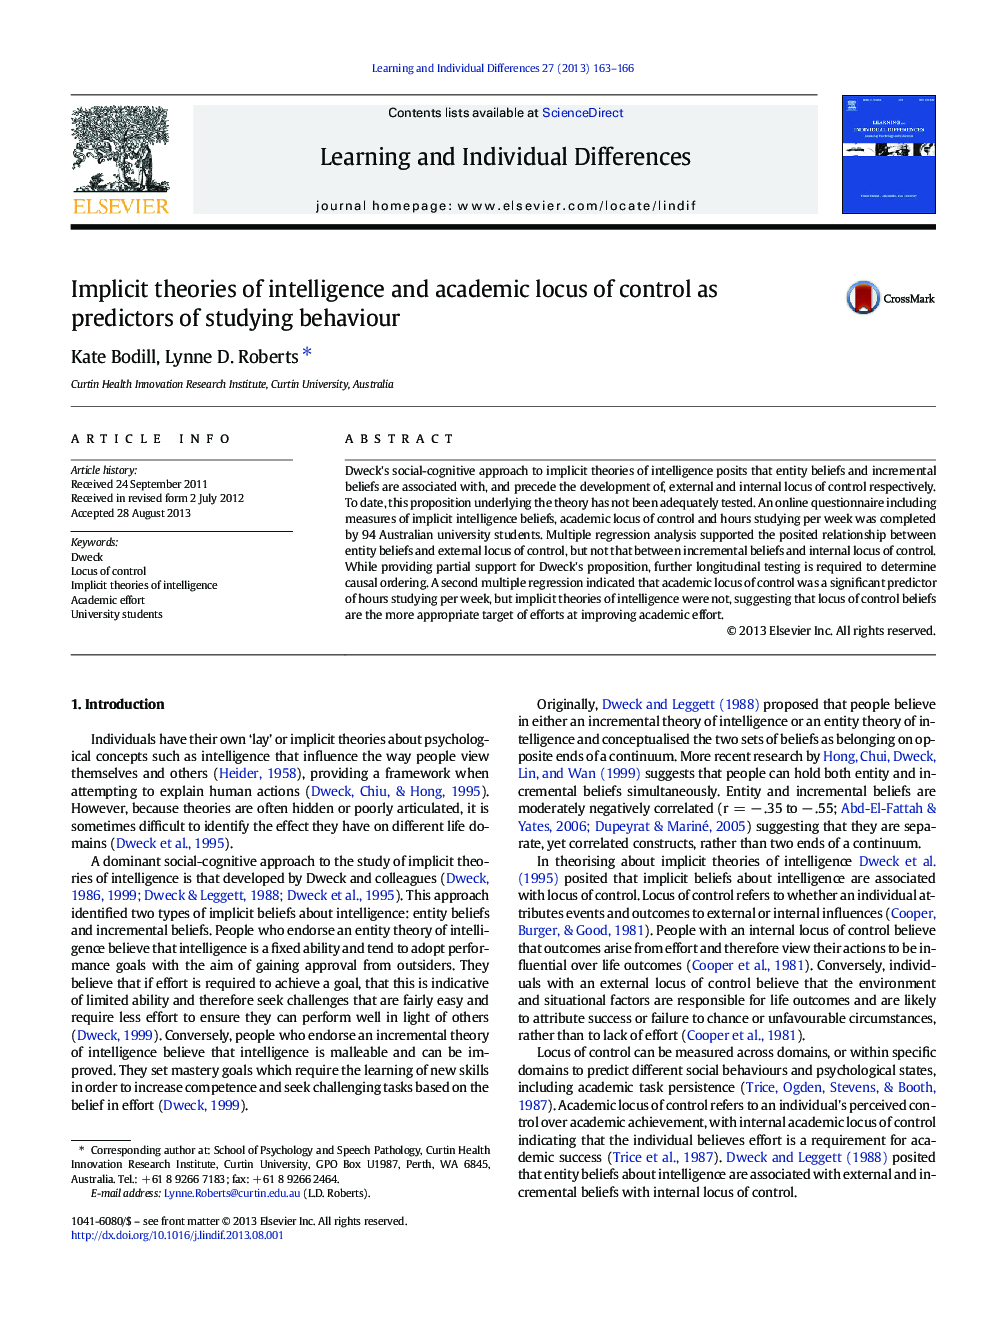 Implicit theories of intelligence and academic locus of control as predictors of studying behaviour